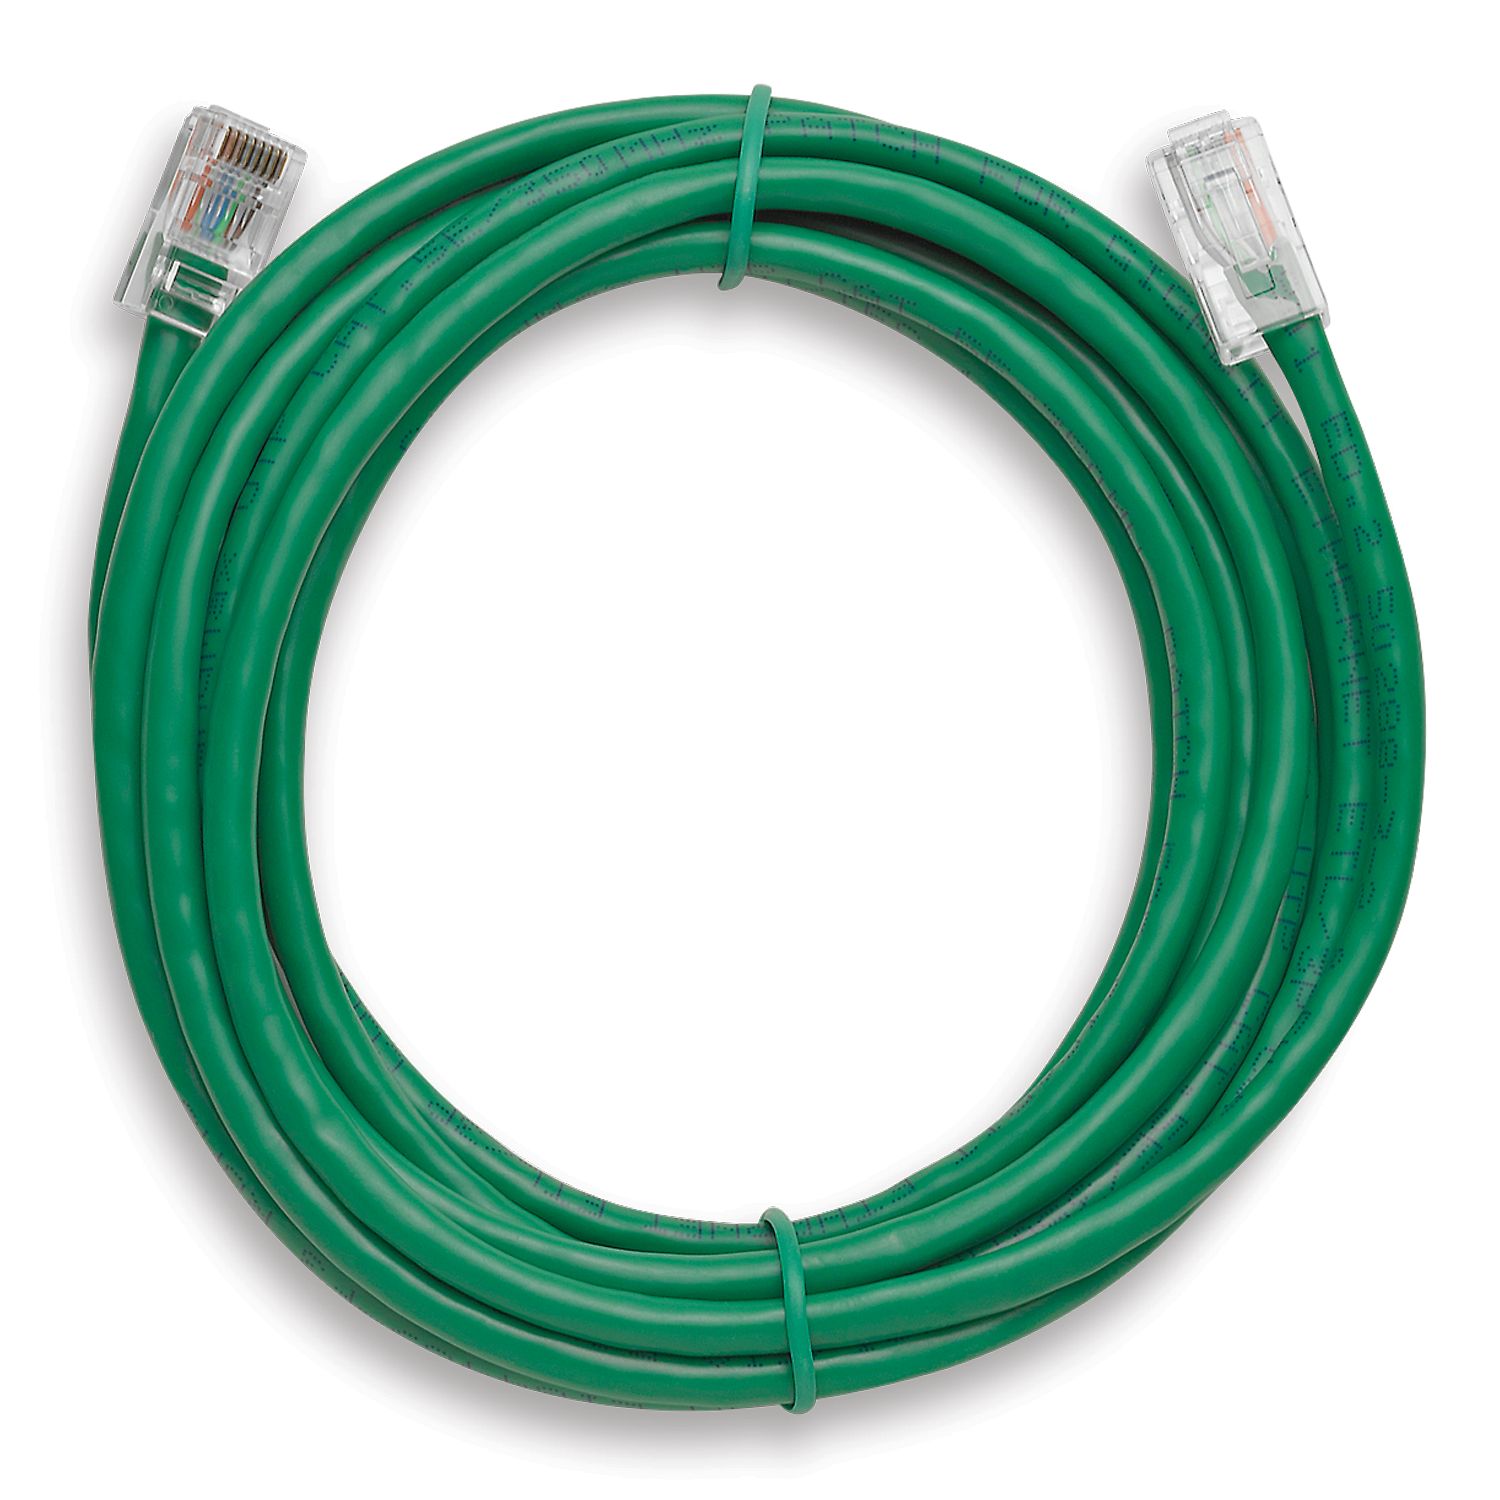 CAT5 GREEN CABLE 50 FEET PLENUM RATED